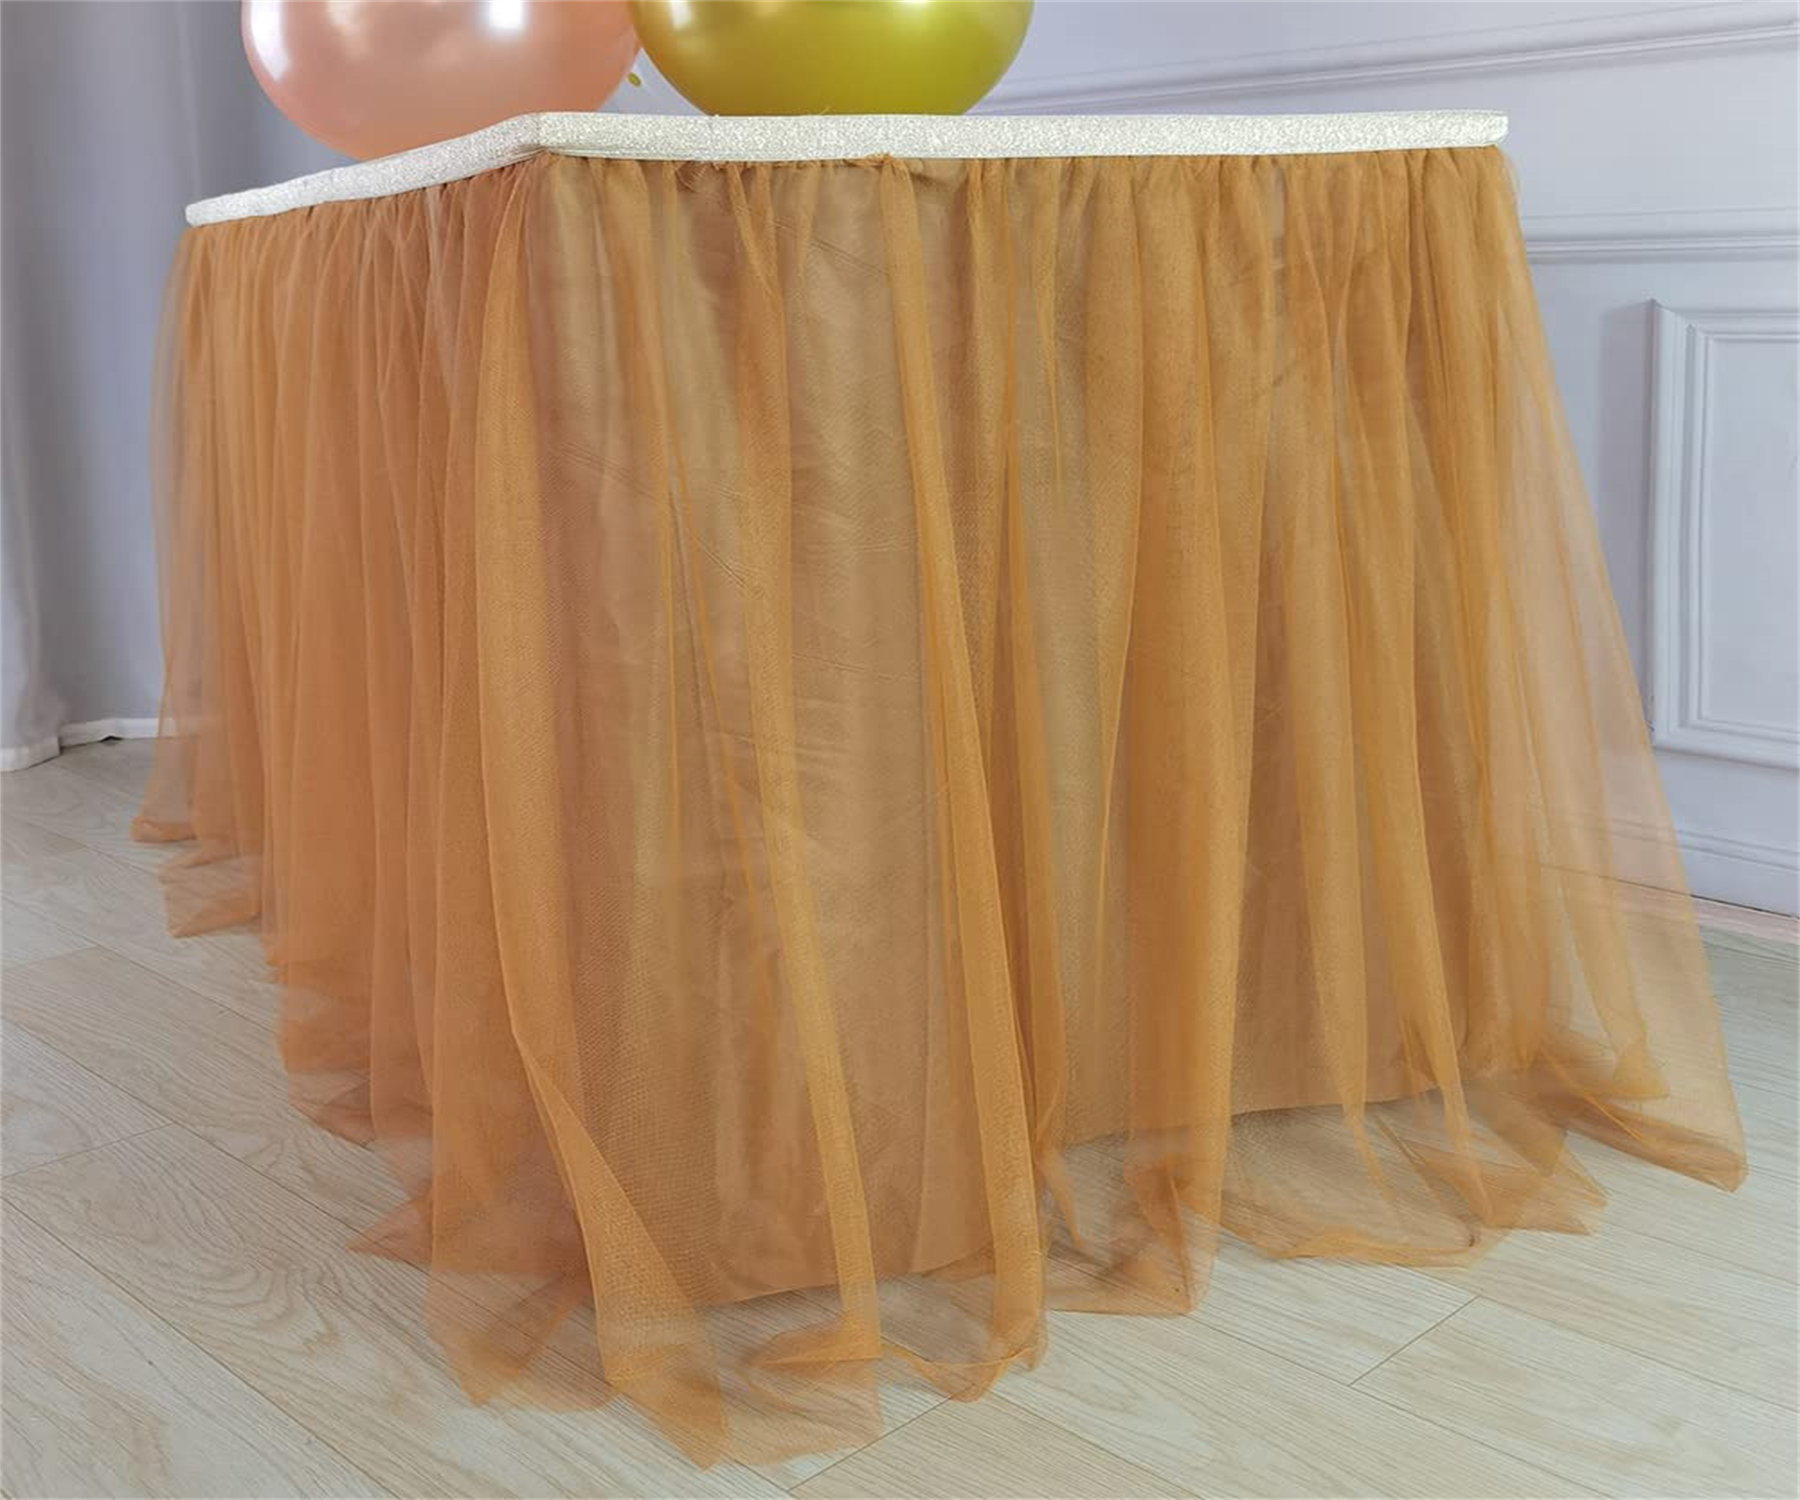 Tutu Table Skirt 6ft for Round Retangle Table Adjustable Tulle Table Skirting for Birthday Baby Shower Graduation Wedding Anniversary Picnic Friends or Family Party Decoration-Mermaid 6FT, Blue